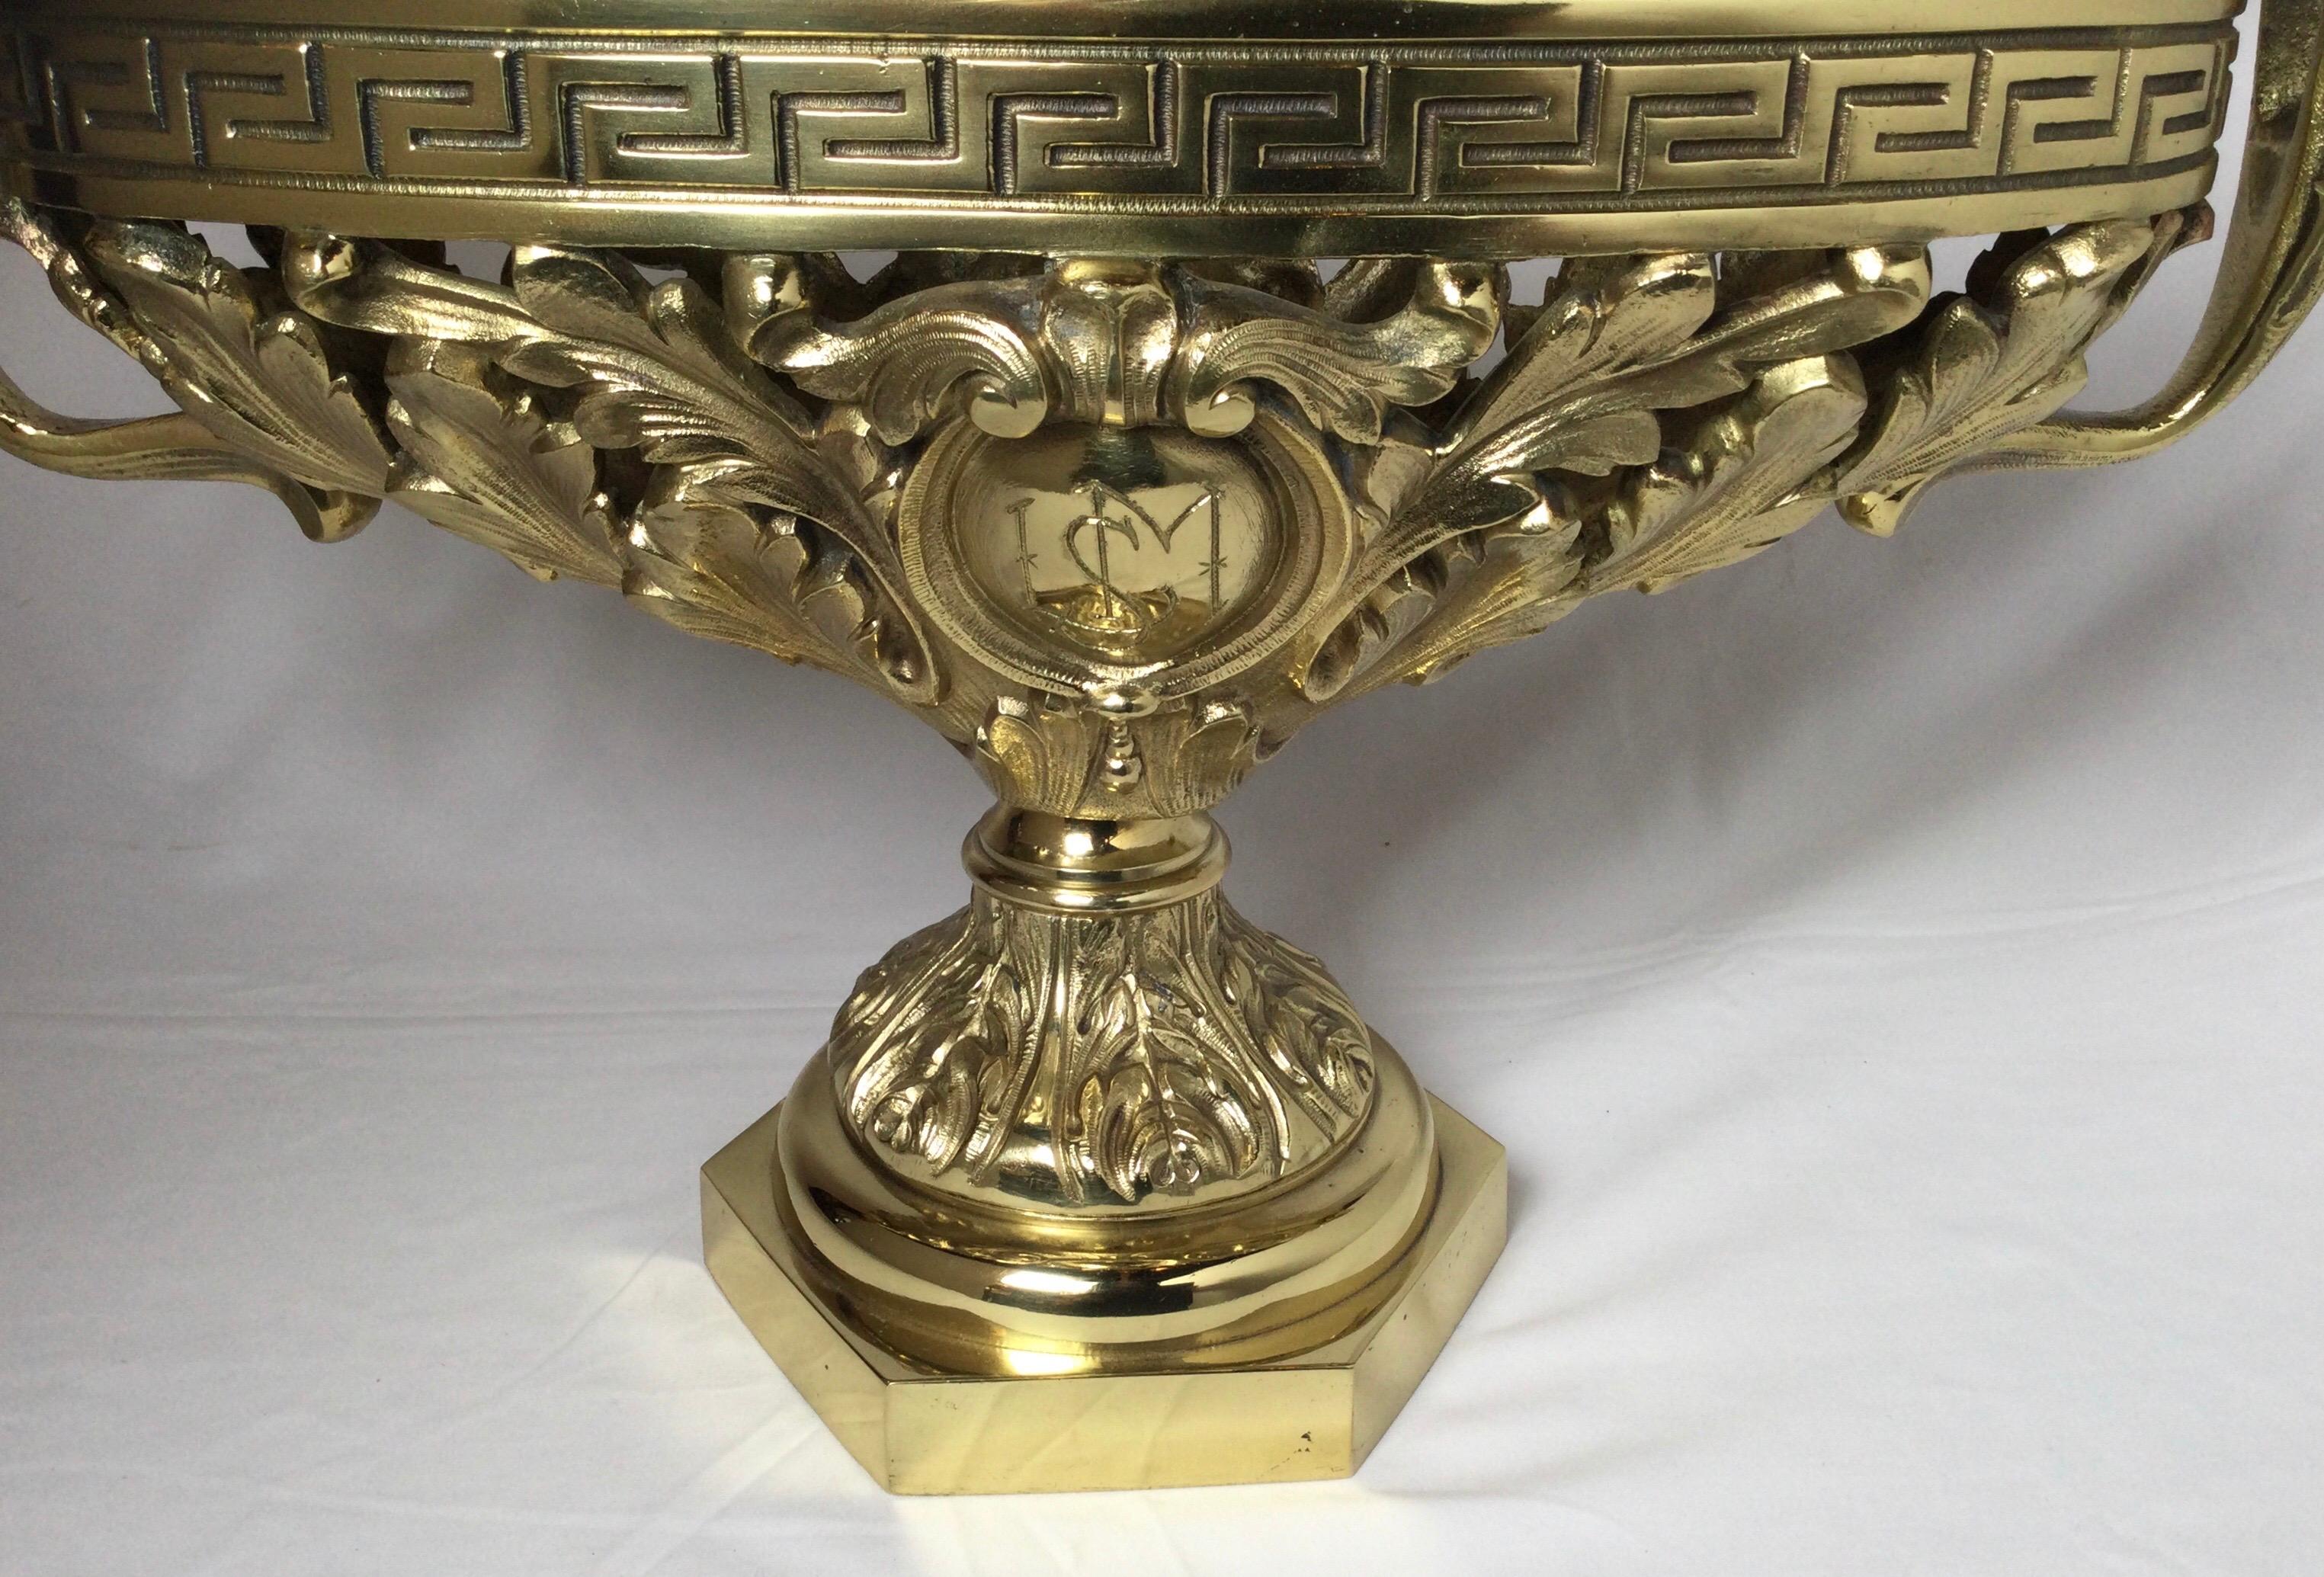 A German 19th century cast bronze ornately figured center bowl. The decorative floral design with medallion monogram on one side. The piece is professionally polished and lacquered. The base measures 7 inches square.